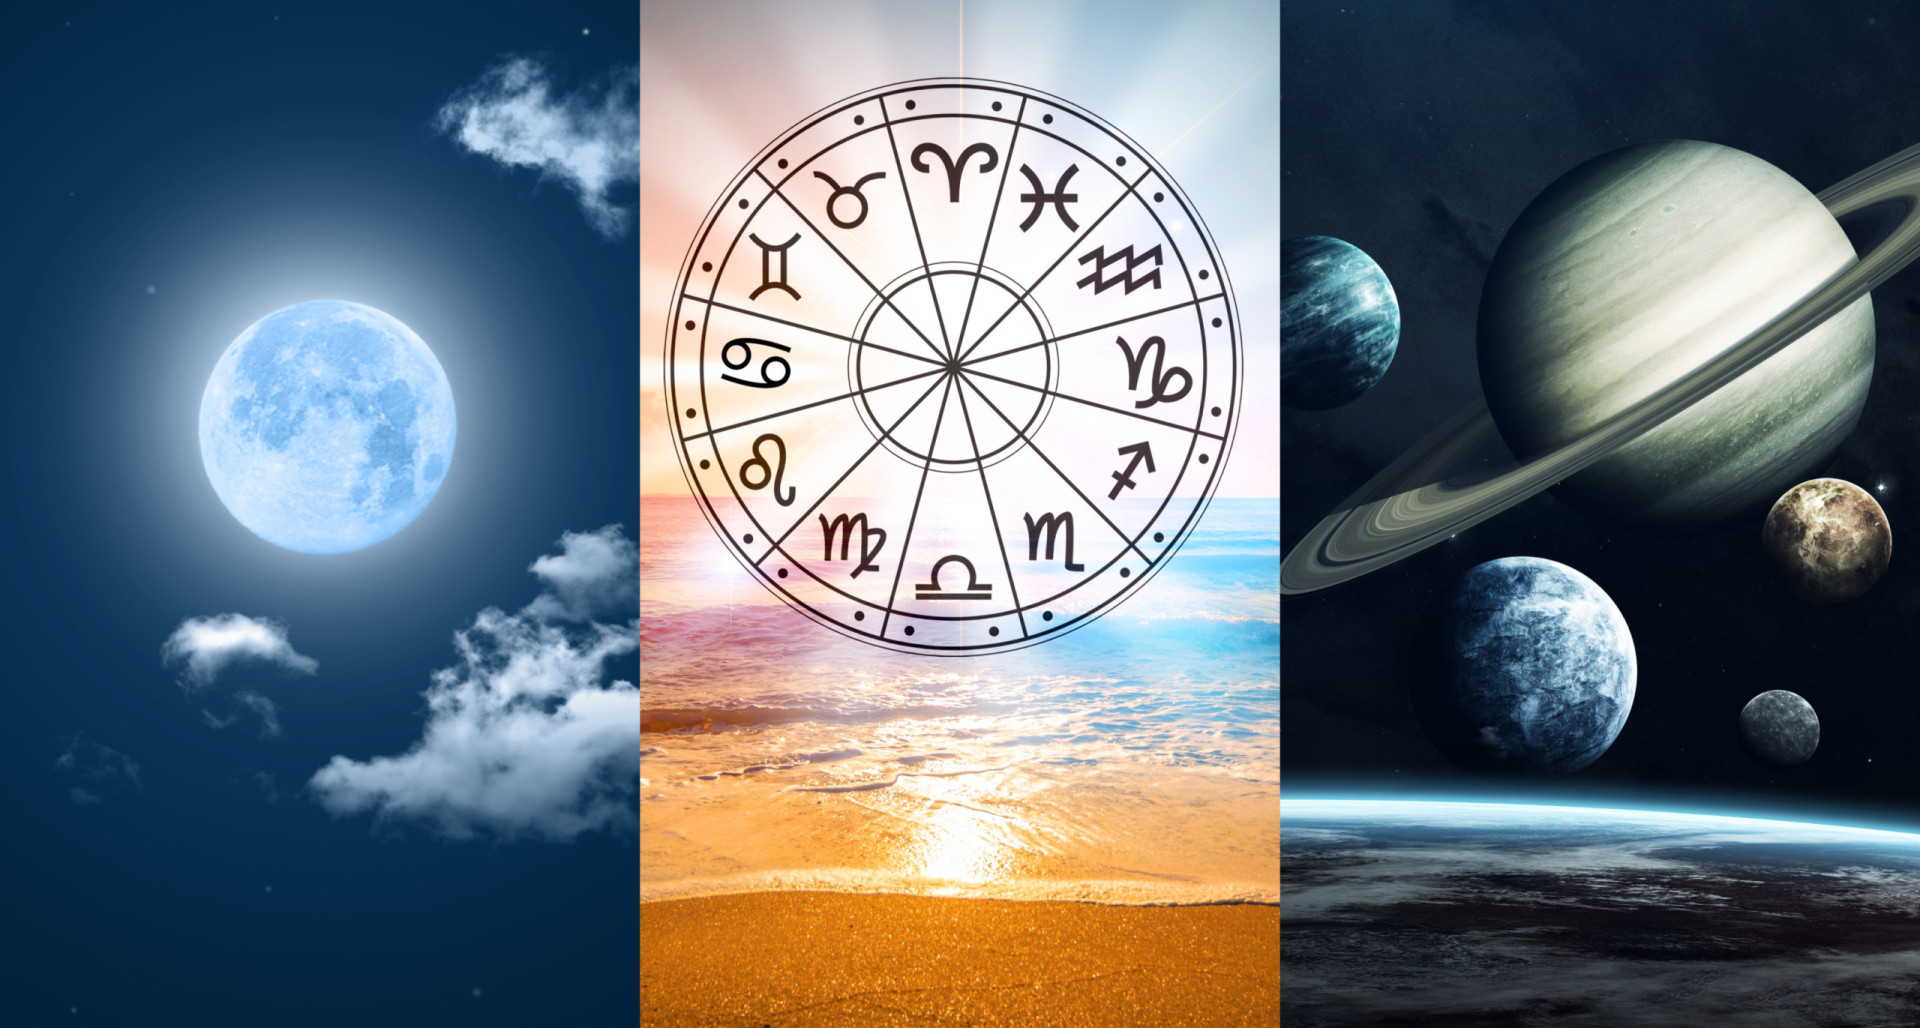 <p>Indeed, the summer months are usually busy with activities, and the skies are no exception. July is a powerful time <a href="https://www.starsinsider.com/lifestyle/643806/prepare-yourself-for-the-biggest-astrology-transits-yet-to-come-in-2024" rel="noopener">astrologically</a>, with the potential for much creative transformation as a dynamic sense of change fills the air. It's a time to check in and make sure that the actions you're taking in the physical world are in alignment with your inner being, and to pivot if not; being your authentic self is the fastest way to step into the metamorphosis this month is calling for.</p> <p>Intrigued? Click on to discover the key planetary transits in July 2024, and what they mean on a collective energy level.</p><p>You may also like:<a href="https://www.starsinsider.com/n/171295?utm_source=msn.com&utm_medium=display&utm_campaign=referral_description&utm_content=733873en-ca"> Celebrities and their guilty pleasures</a></p>